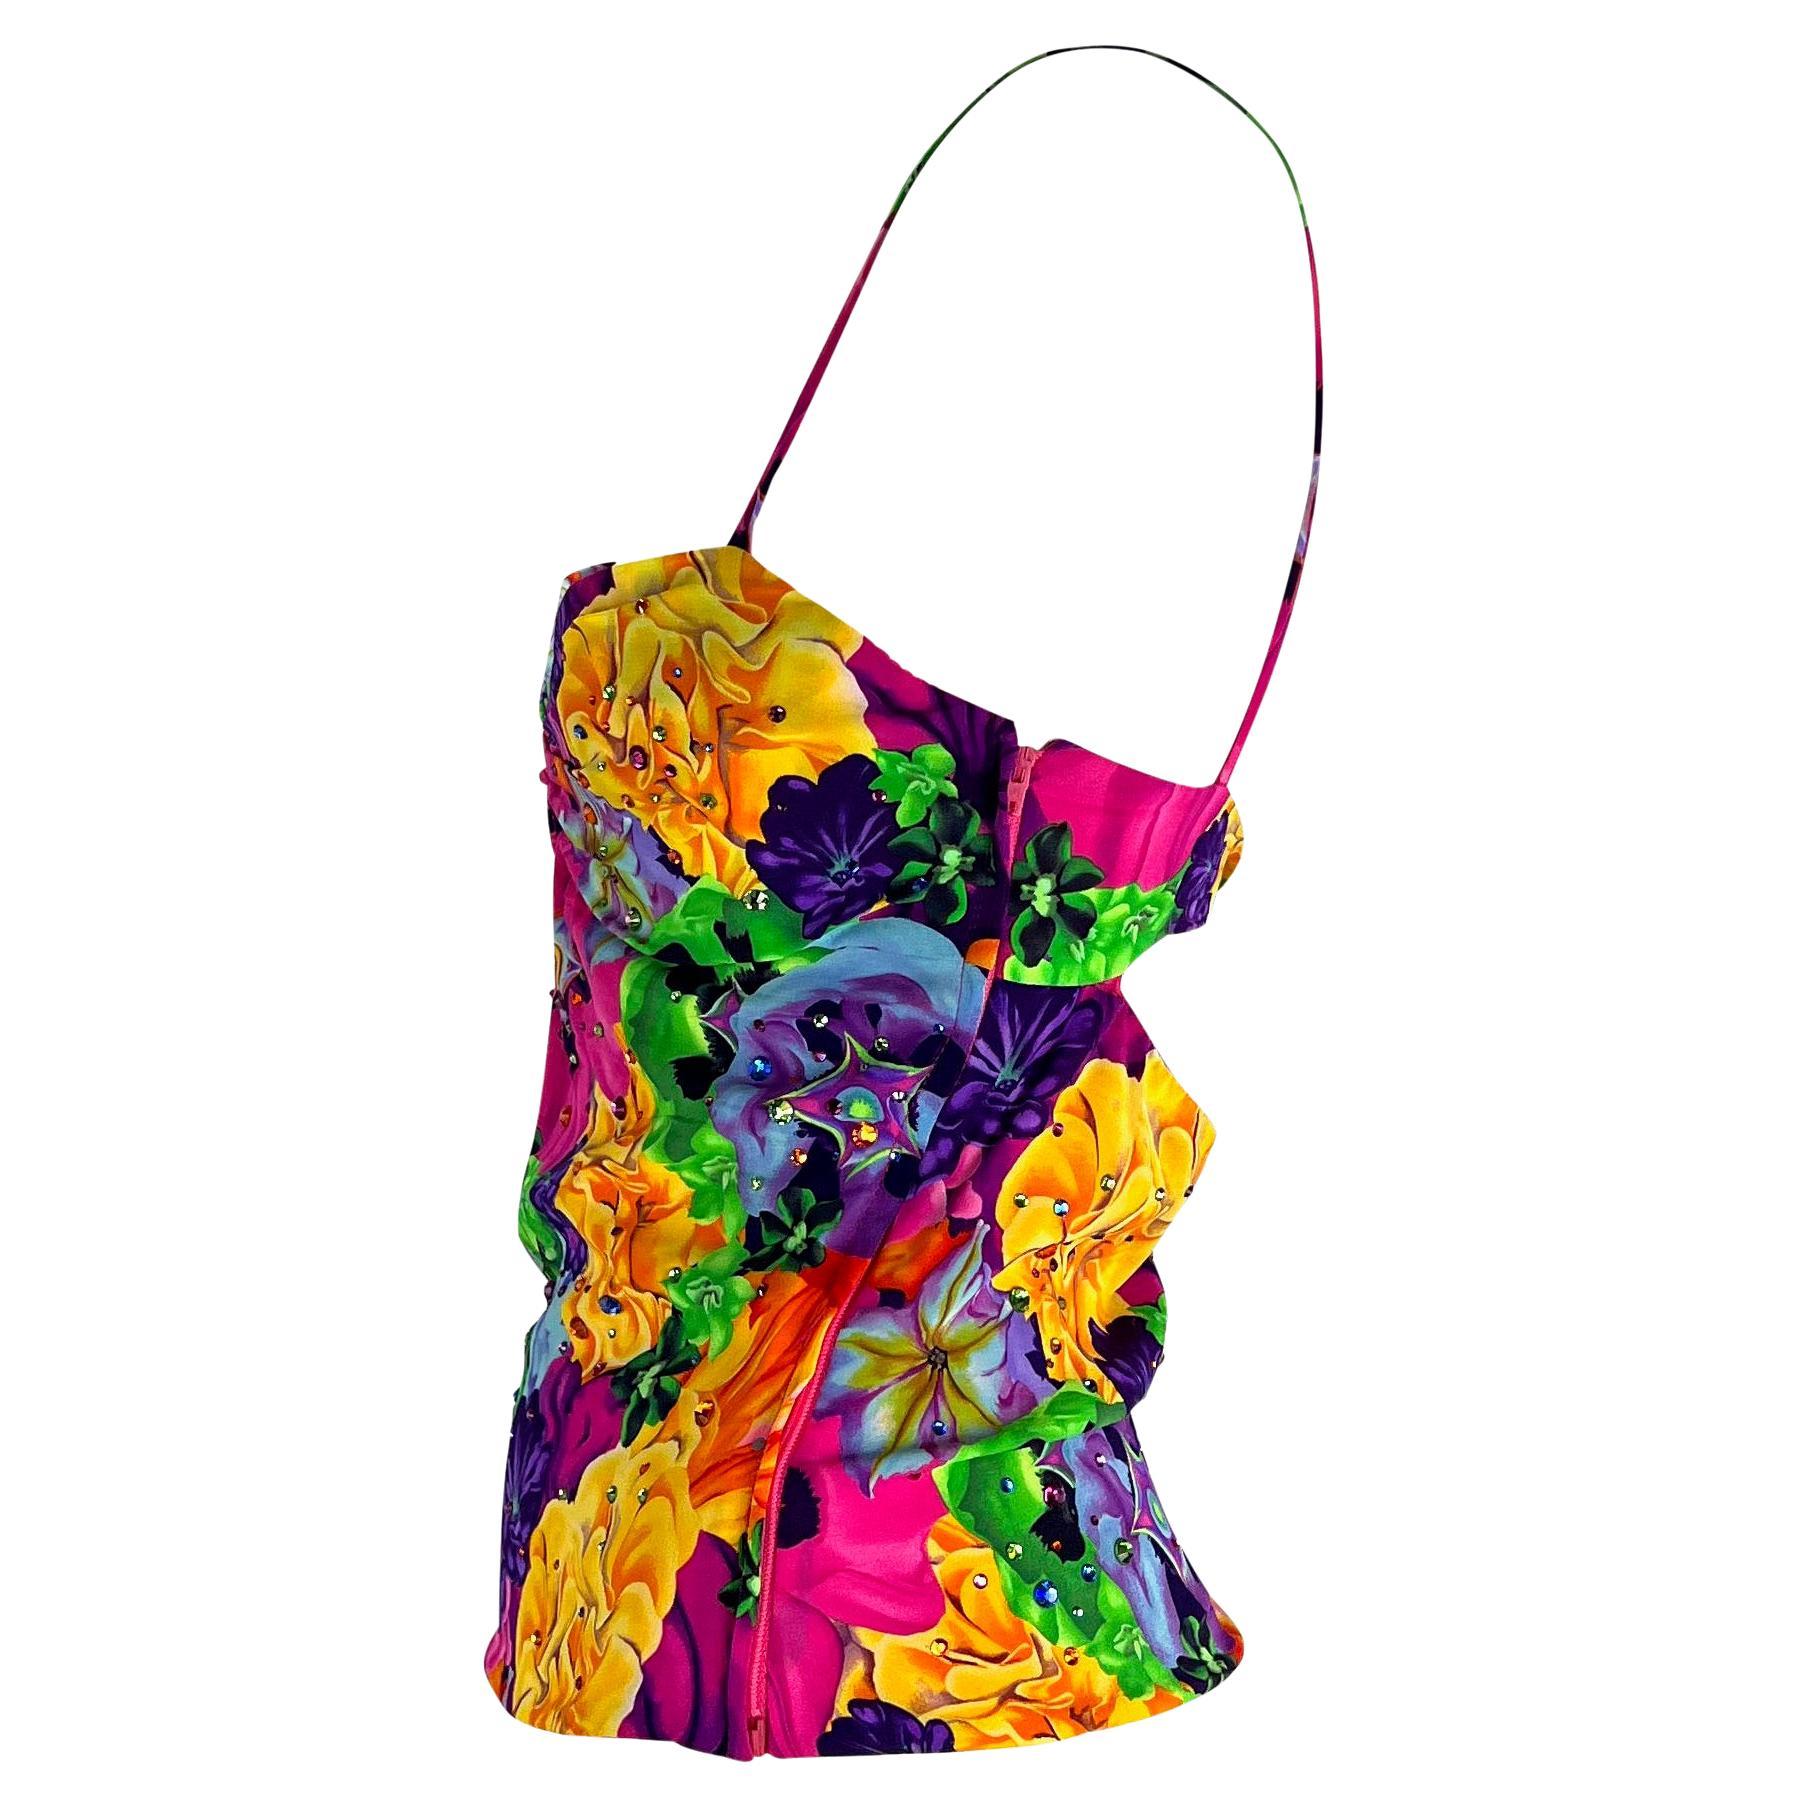 Presenting a bright floral Versace tank top, designed by Donatella Versace. From the Spring/Summer 2004 collection, this vibrant top is covered in a floral print with rhinestones throughout. The top features spaghetti straps, a semi-sweetheart neck